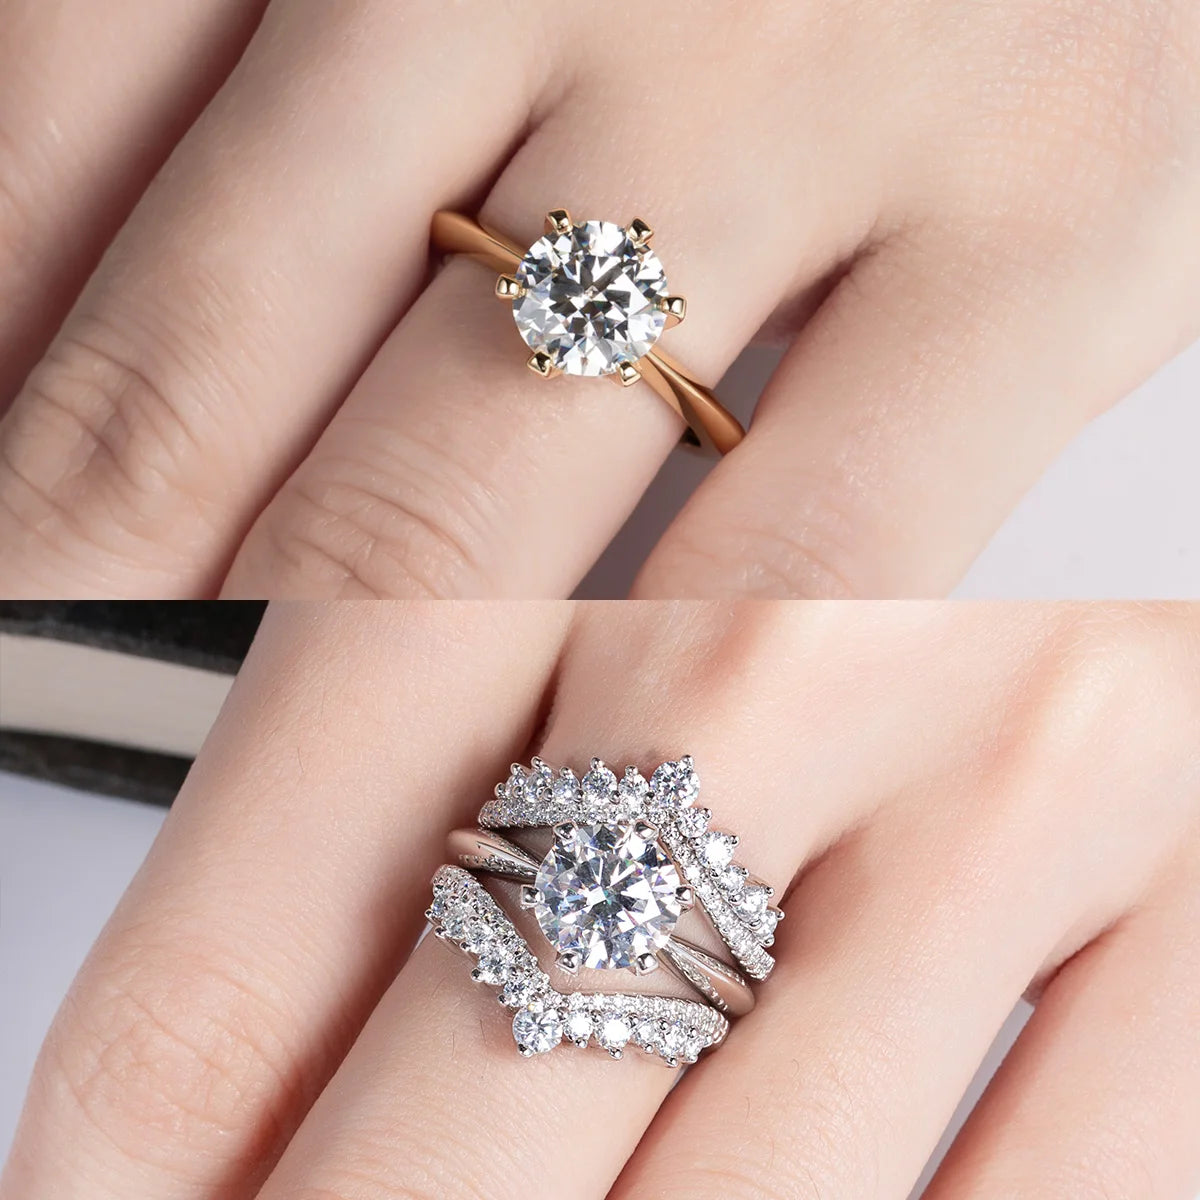 Two close-up images of hands wearing rings: the top hand displays a Maramalive™ Moissanite Solitaire Rings: Stunning Engagement Jewelry with a gold band featuring a single large moissanite center stone, while the bottom hand showcases a set of rings adorned with multiple smaller diamonds.